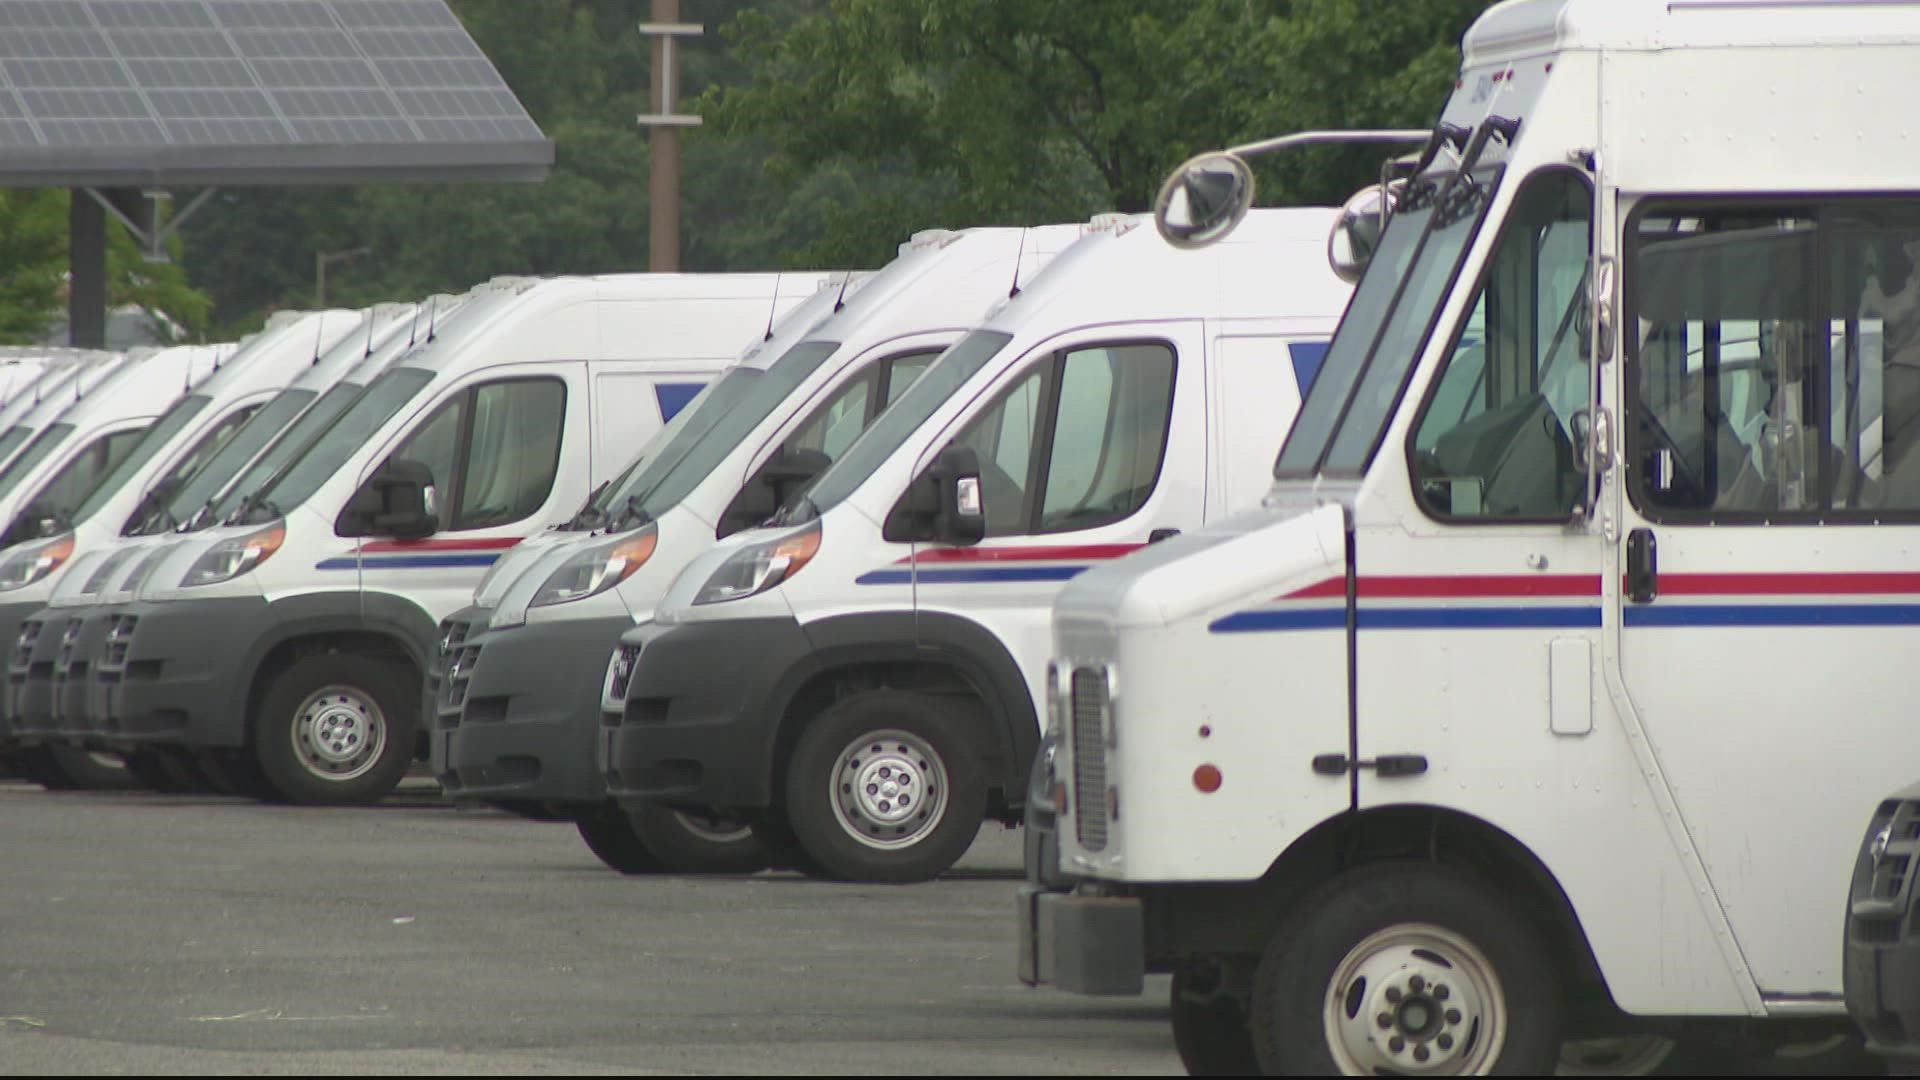 According to the United States Inspection Postal Service, six mail carriers have been robbed since Thursday afternoon.